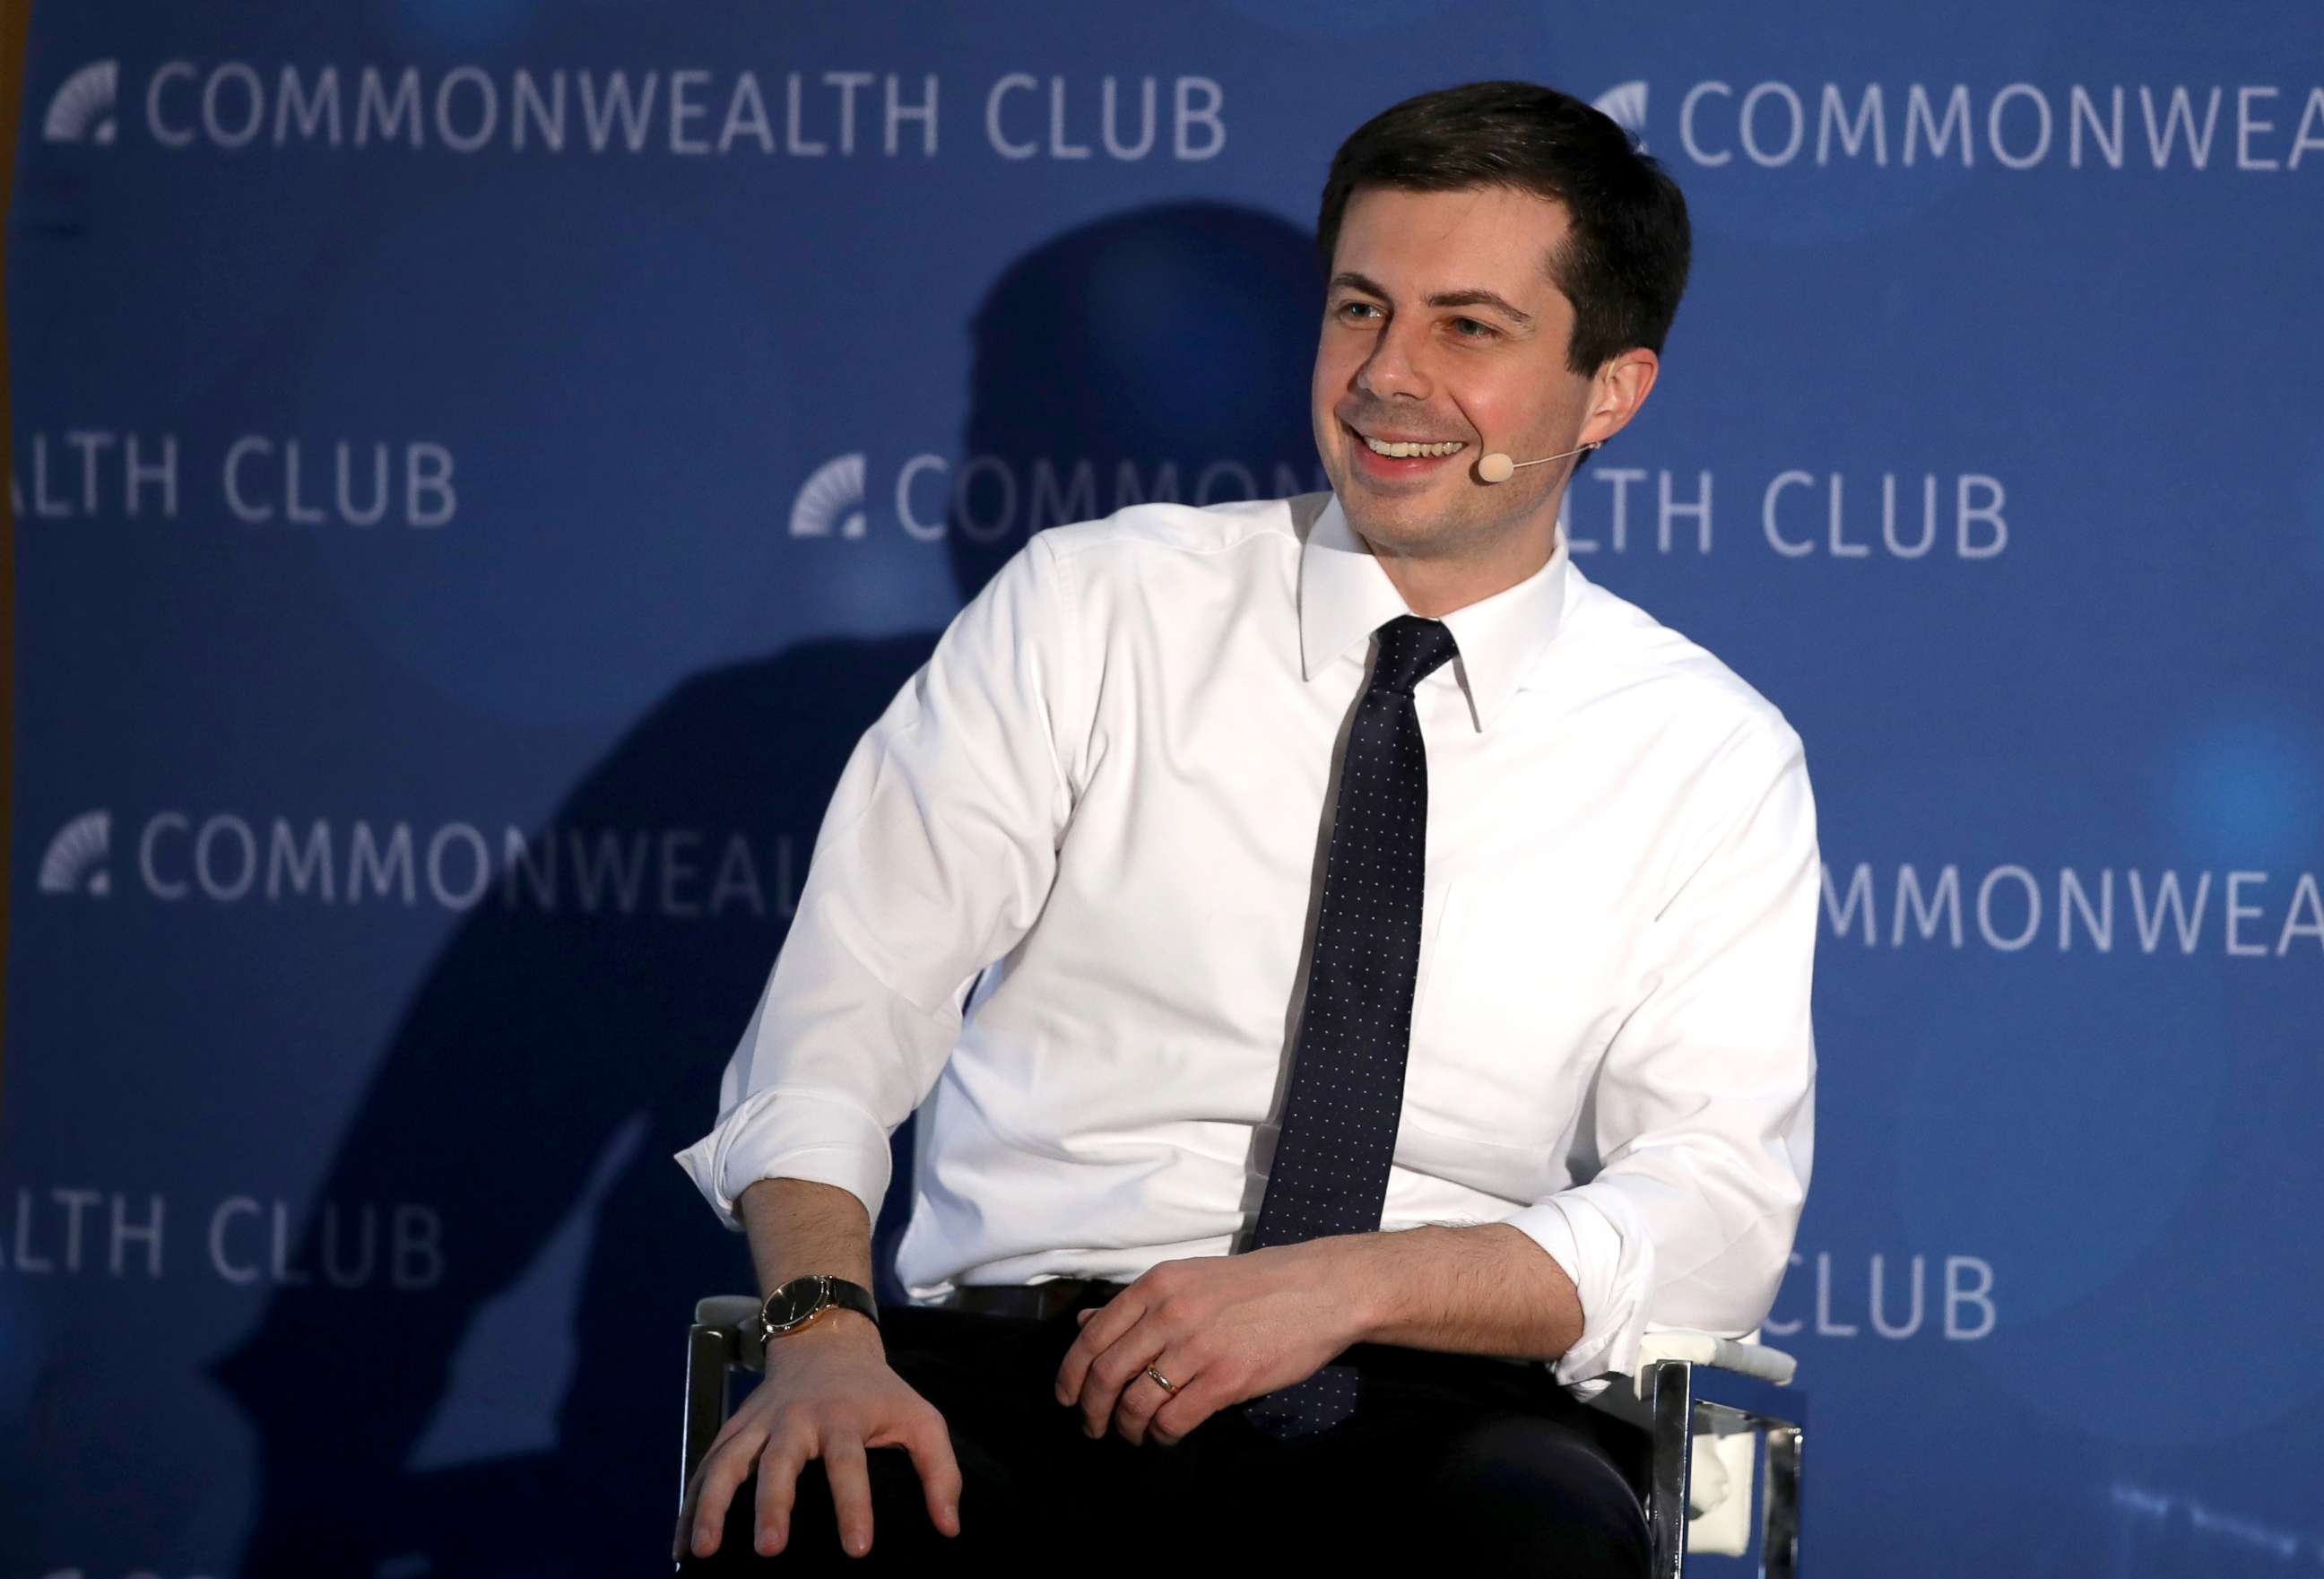 PHOTO: Democratic presidential hopeful South Bend, Indiana mayor Pete Buttigieg speaks at the Commonwealth Club of California, March 28, 2019, in San Francisco.